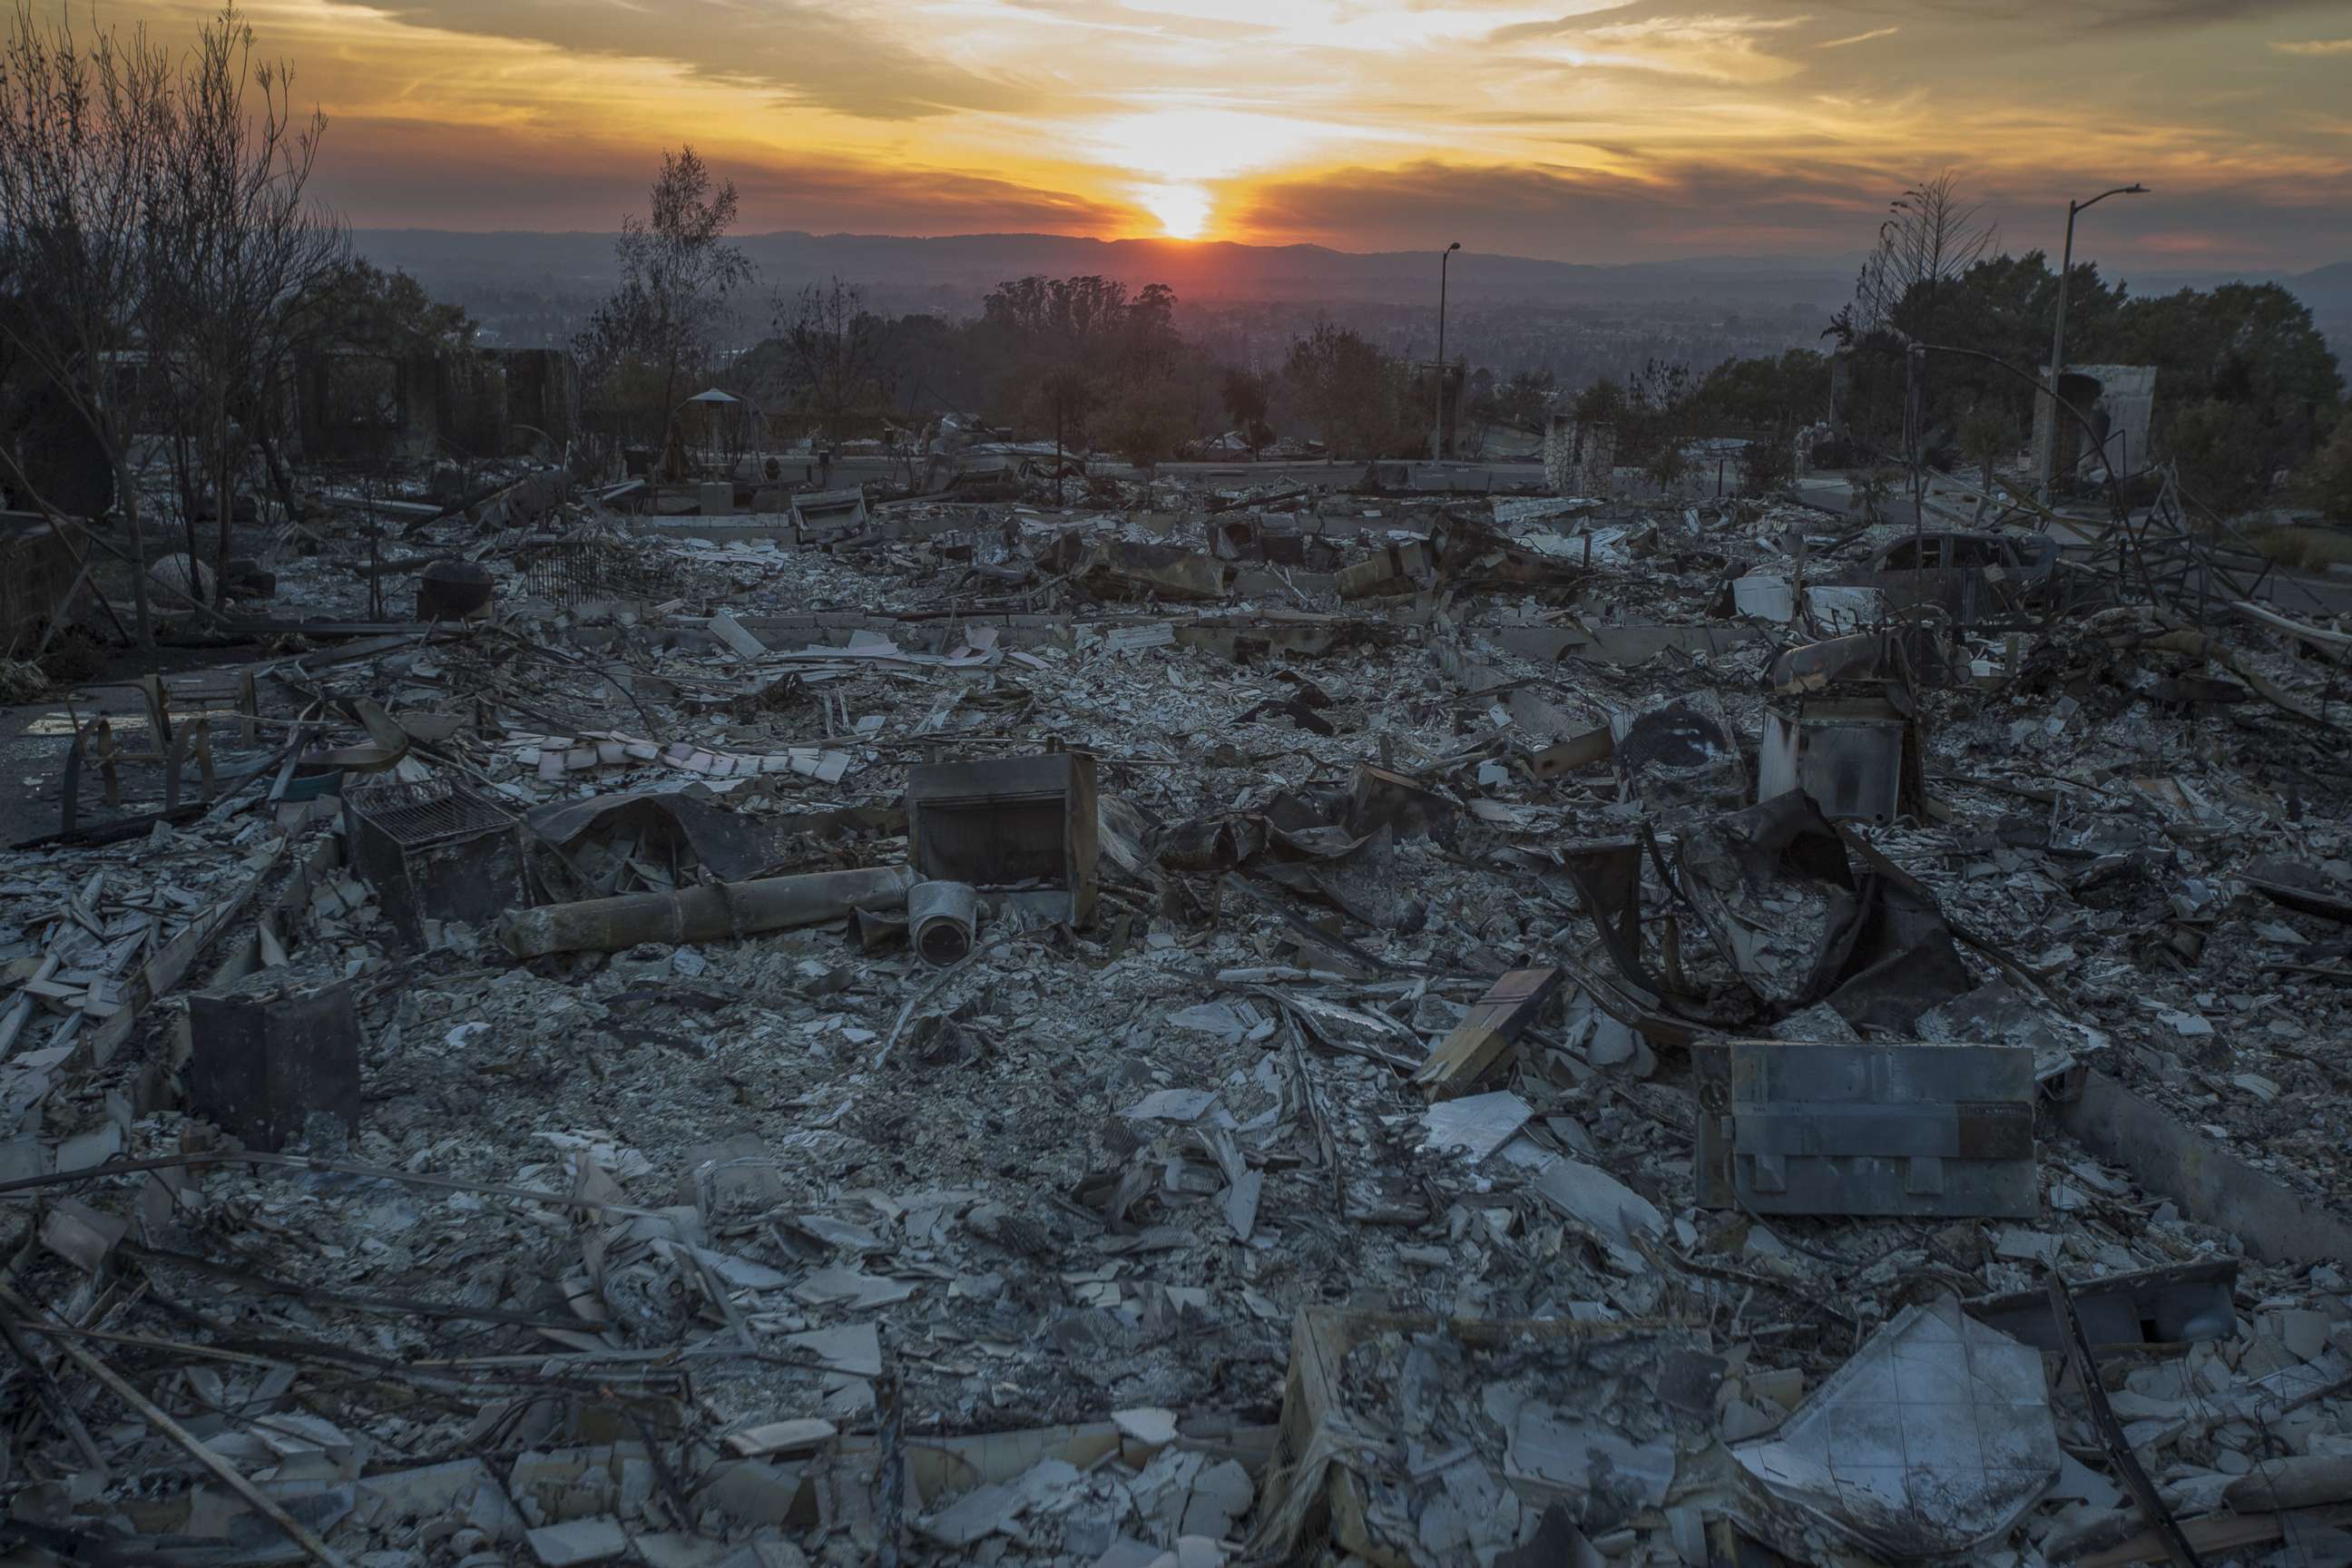 PHOTO: The ruins of houses destroyed by the Tubbs Fire are seen near Fountaingrove Parkway, Oct. 14, 2017 in Santa Rosa, Calif.